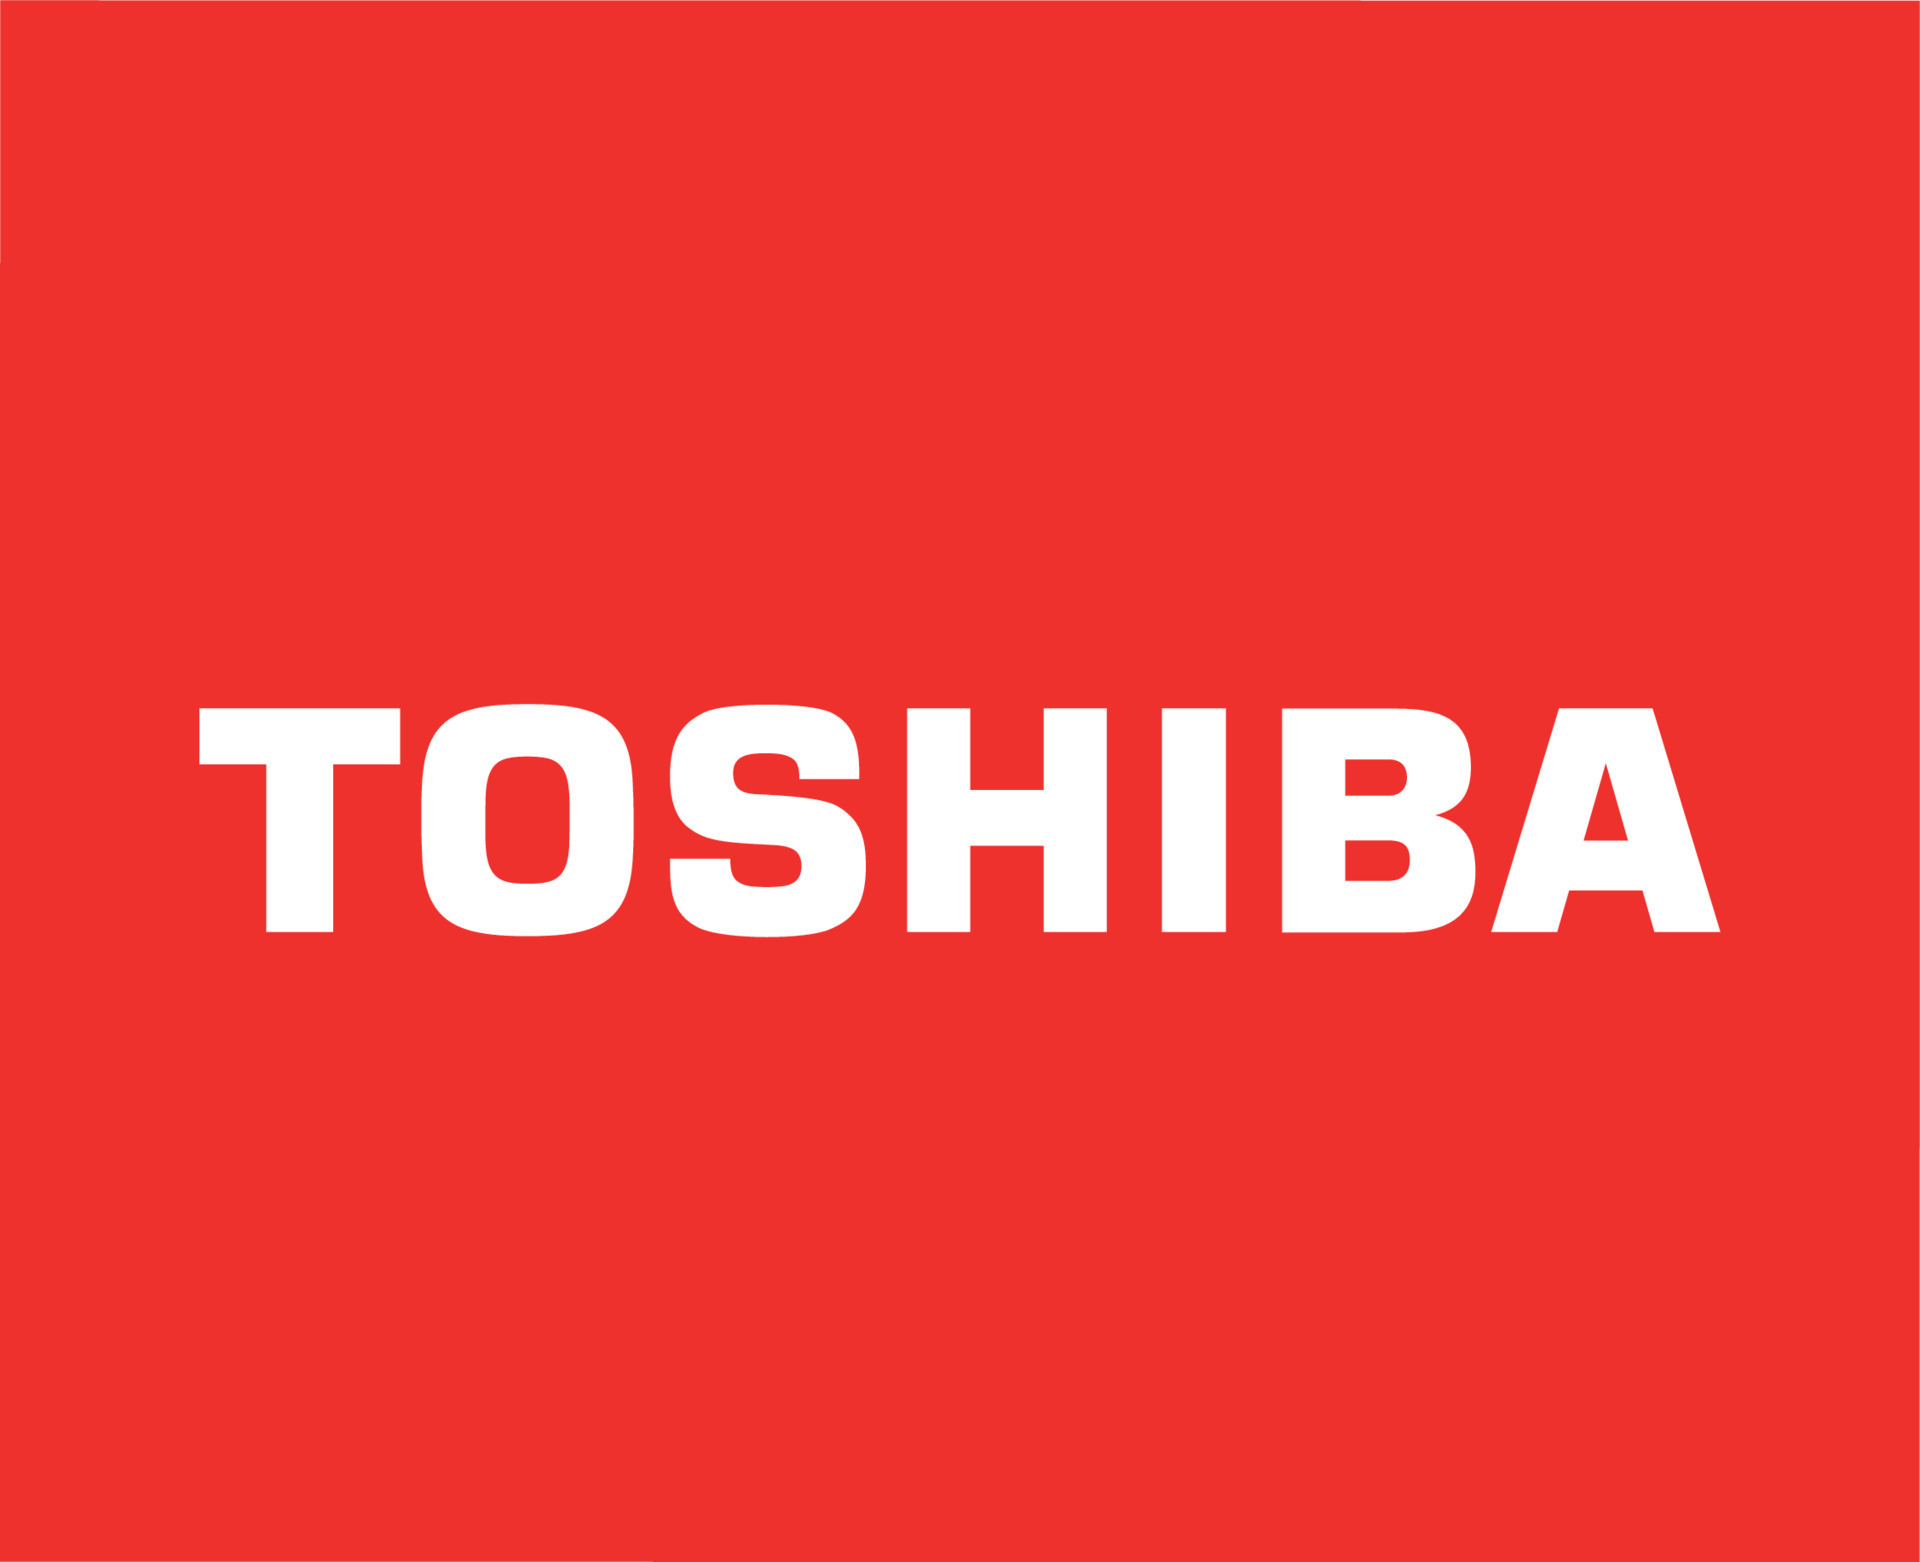 https://static.vecteezy.com/system/resources/previews/021/514/814/original/toshiba-logo-brand-computer-symbol-white-design-french-laptop-illustration-with-red-background-free-vector.jpg